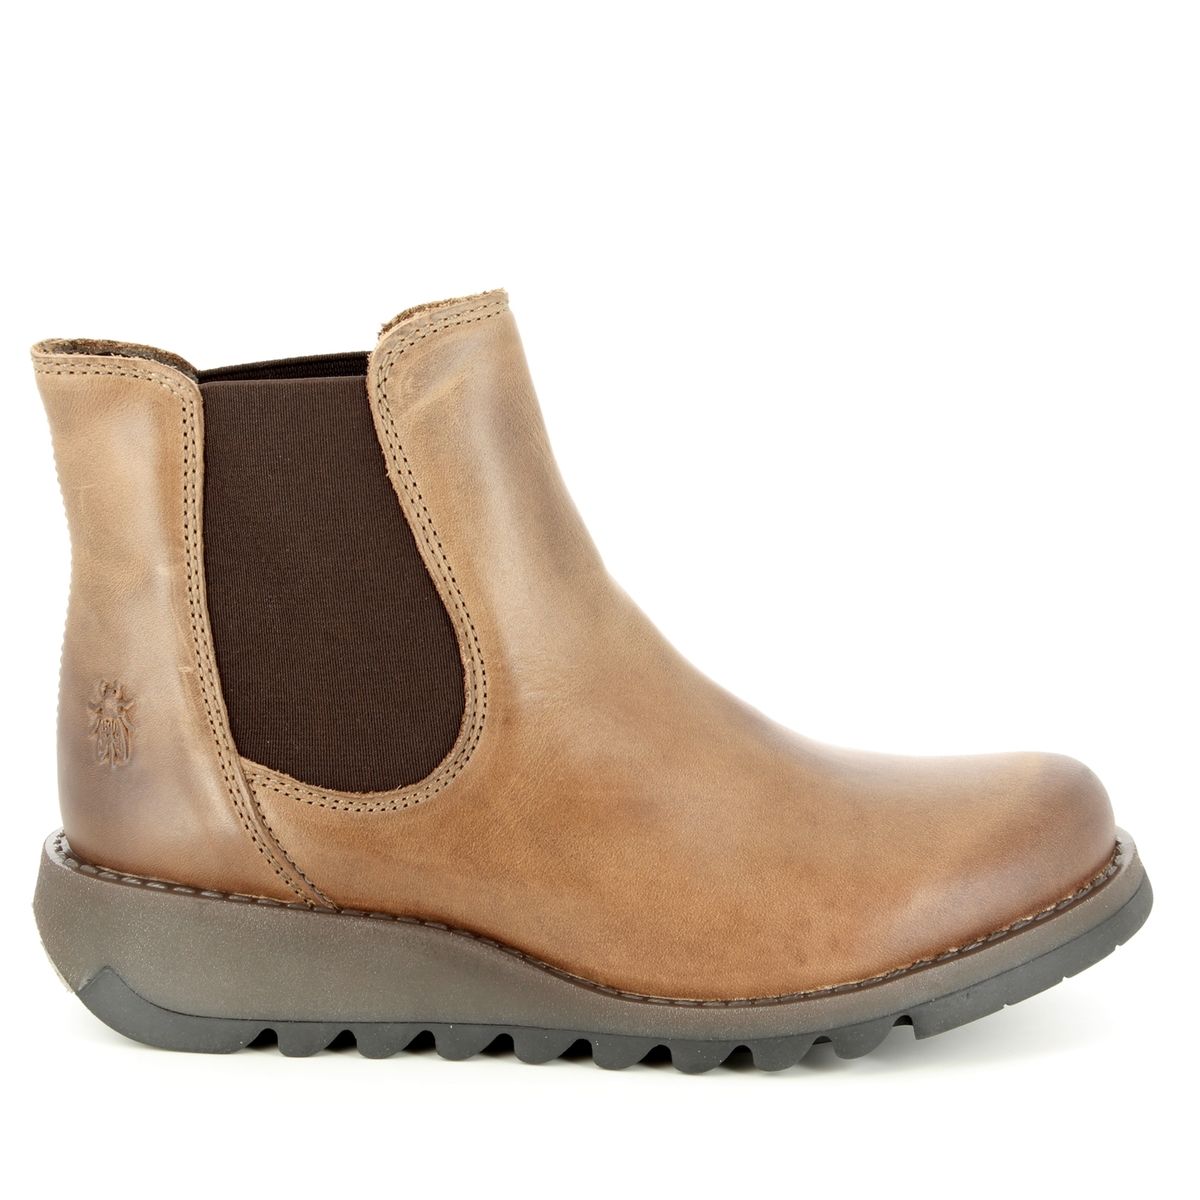 Fly London Salv P143195-002 Camel Chelsea Boots